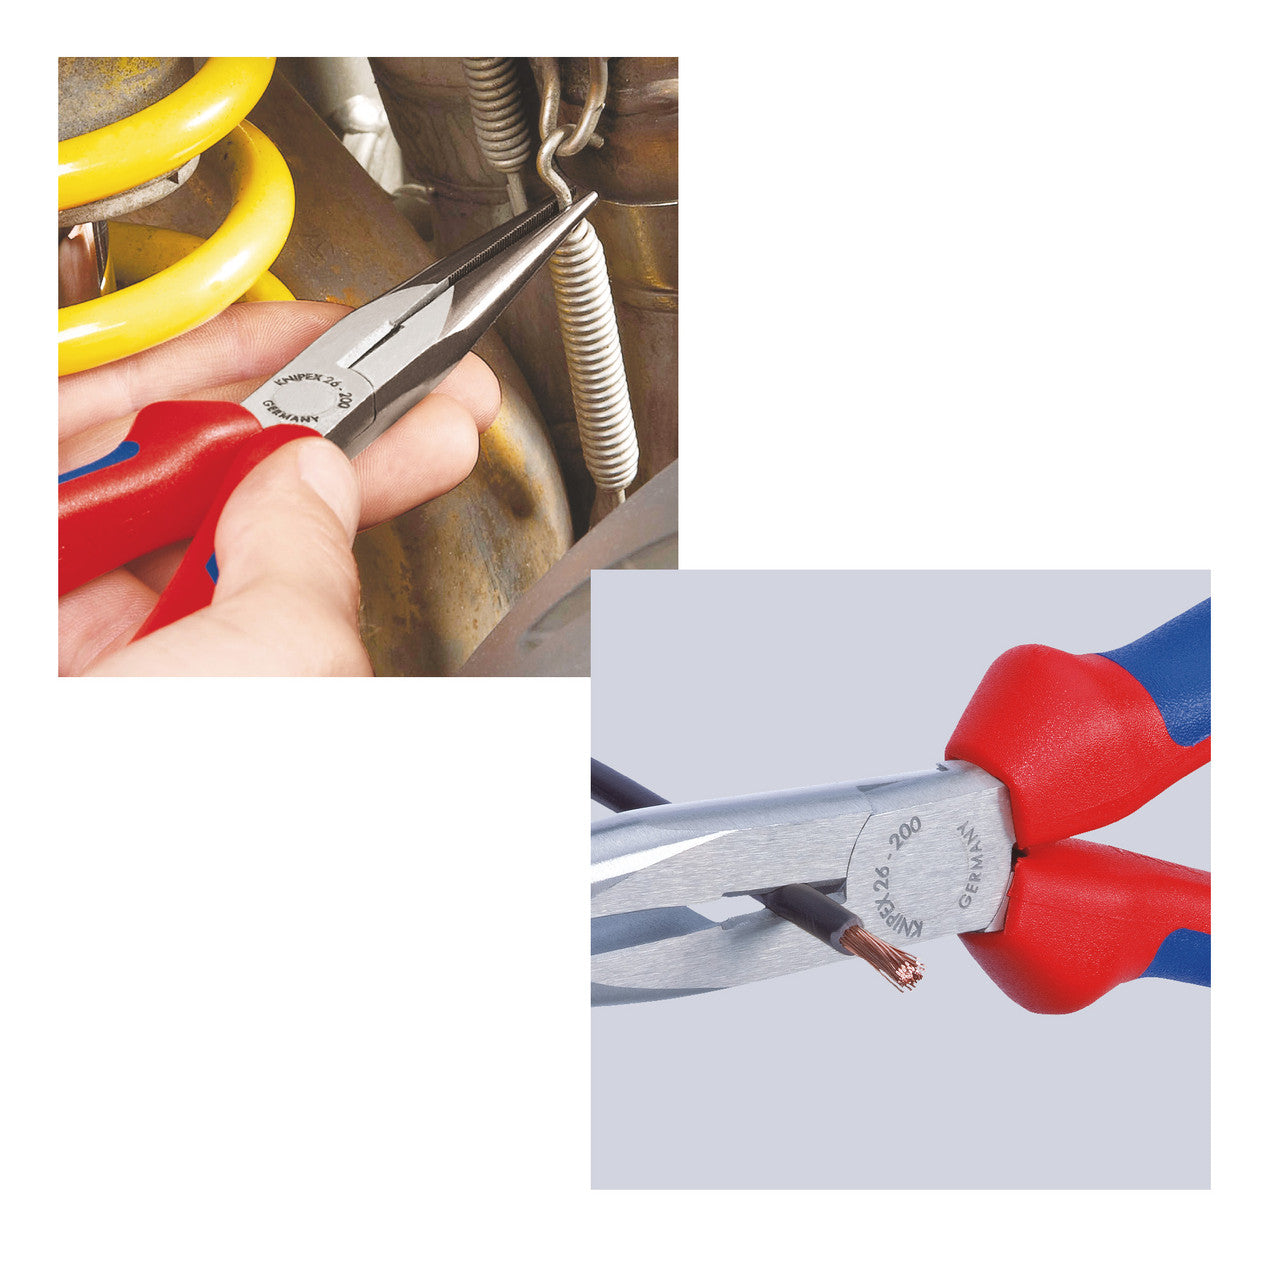 Knipex 2615200 Snipe Nose Side Cutting Pliers 200mm